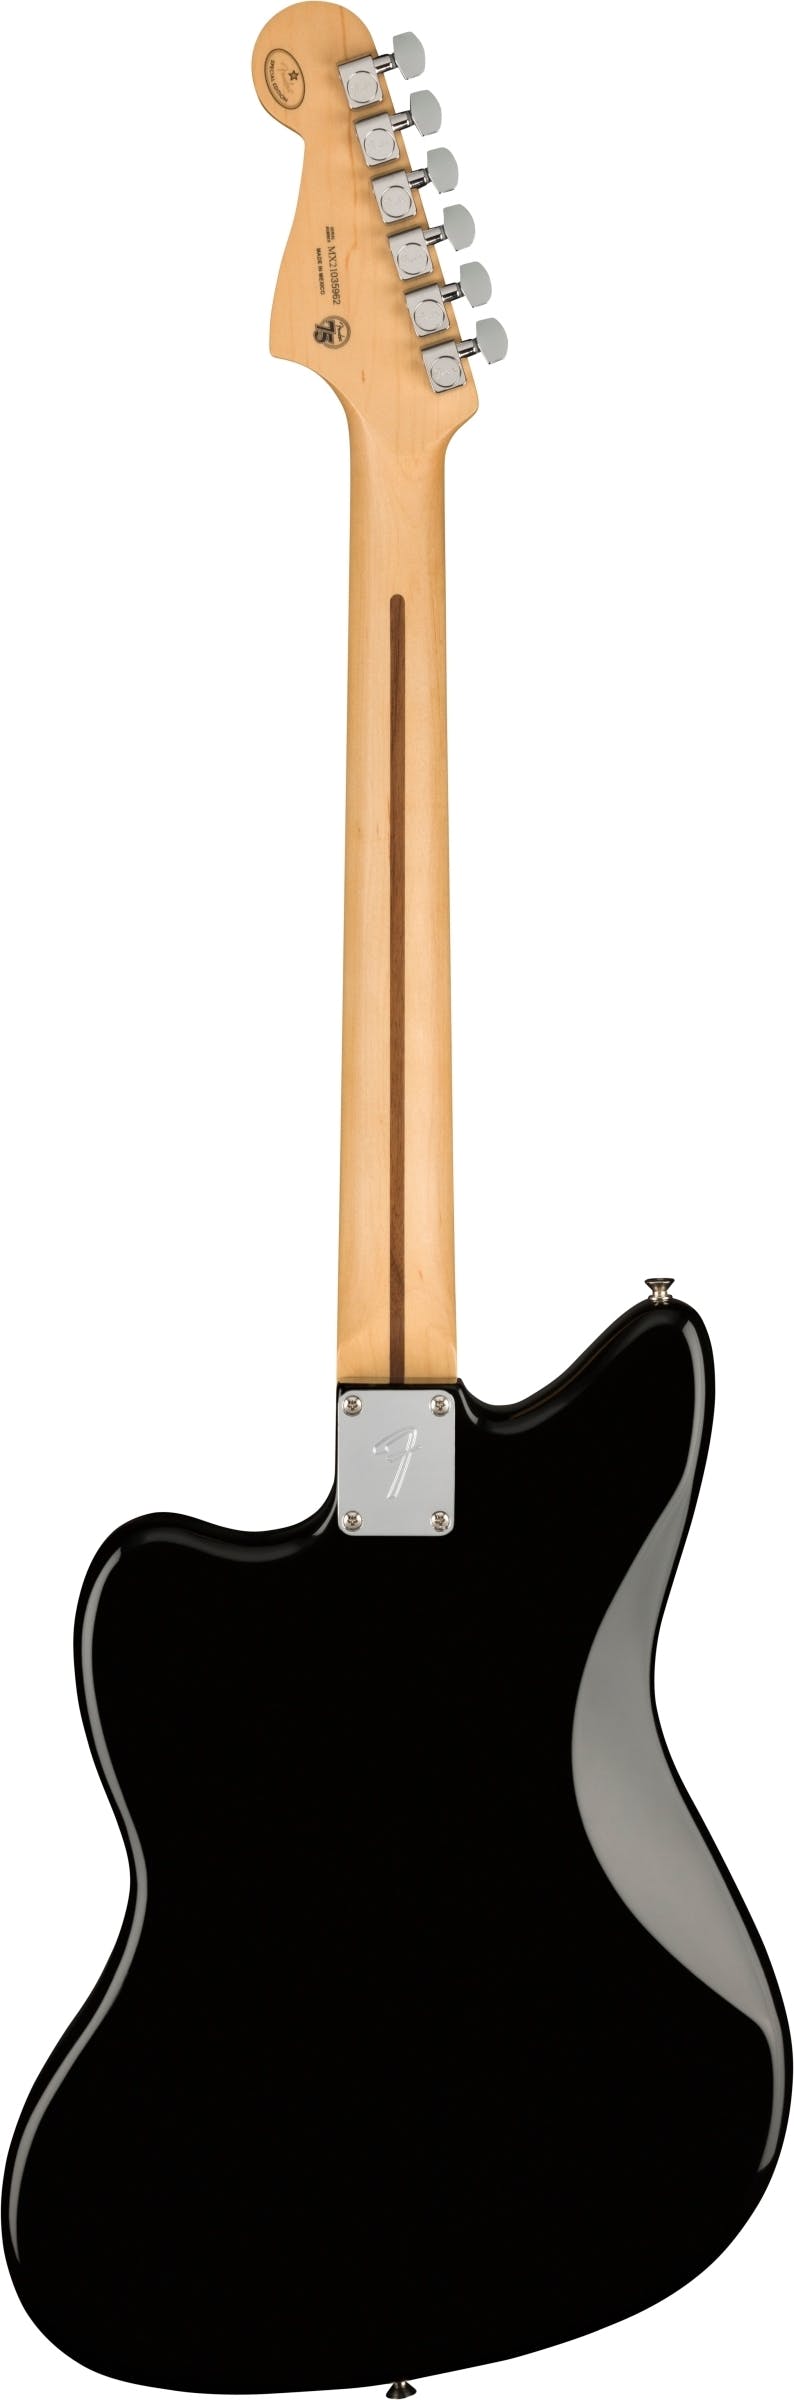 Fender Limited Edition Player Jazzmaster in Black with Matching Headstock -  Andertons Music Co.